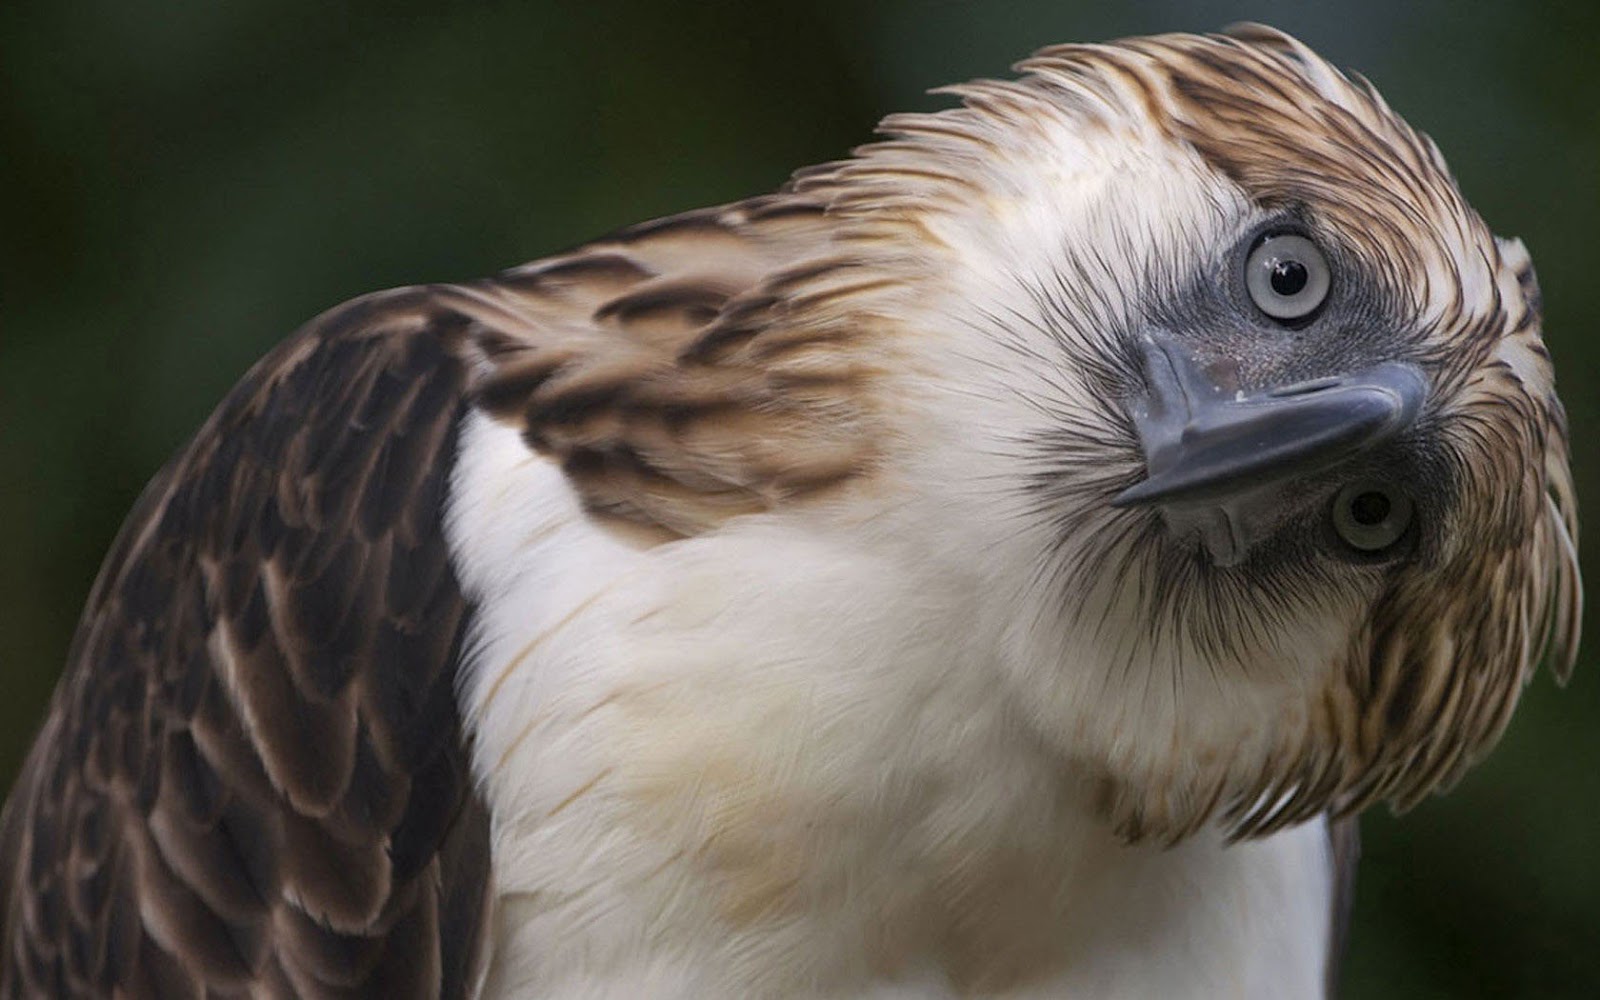 Let's Draw Endangered Species! : ): Philippine Eagle